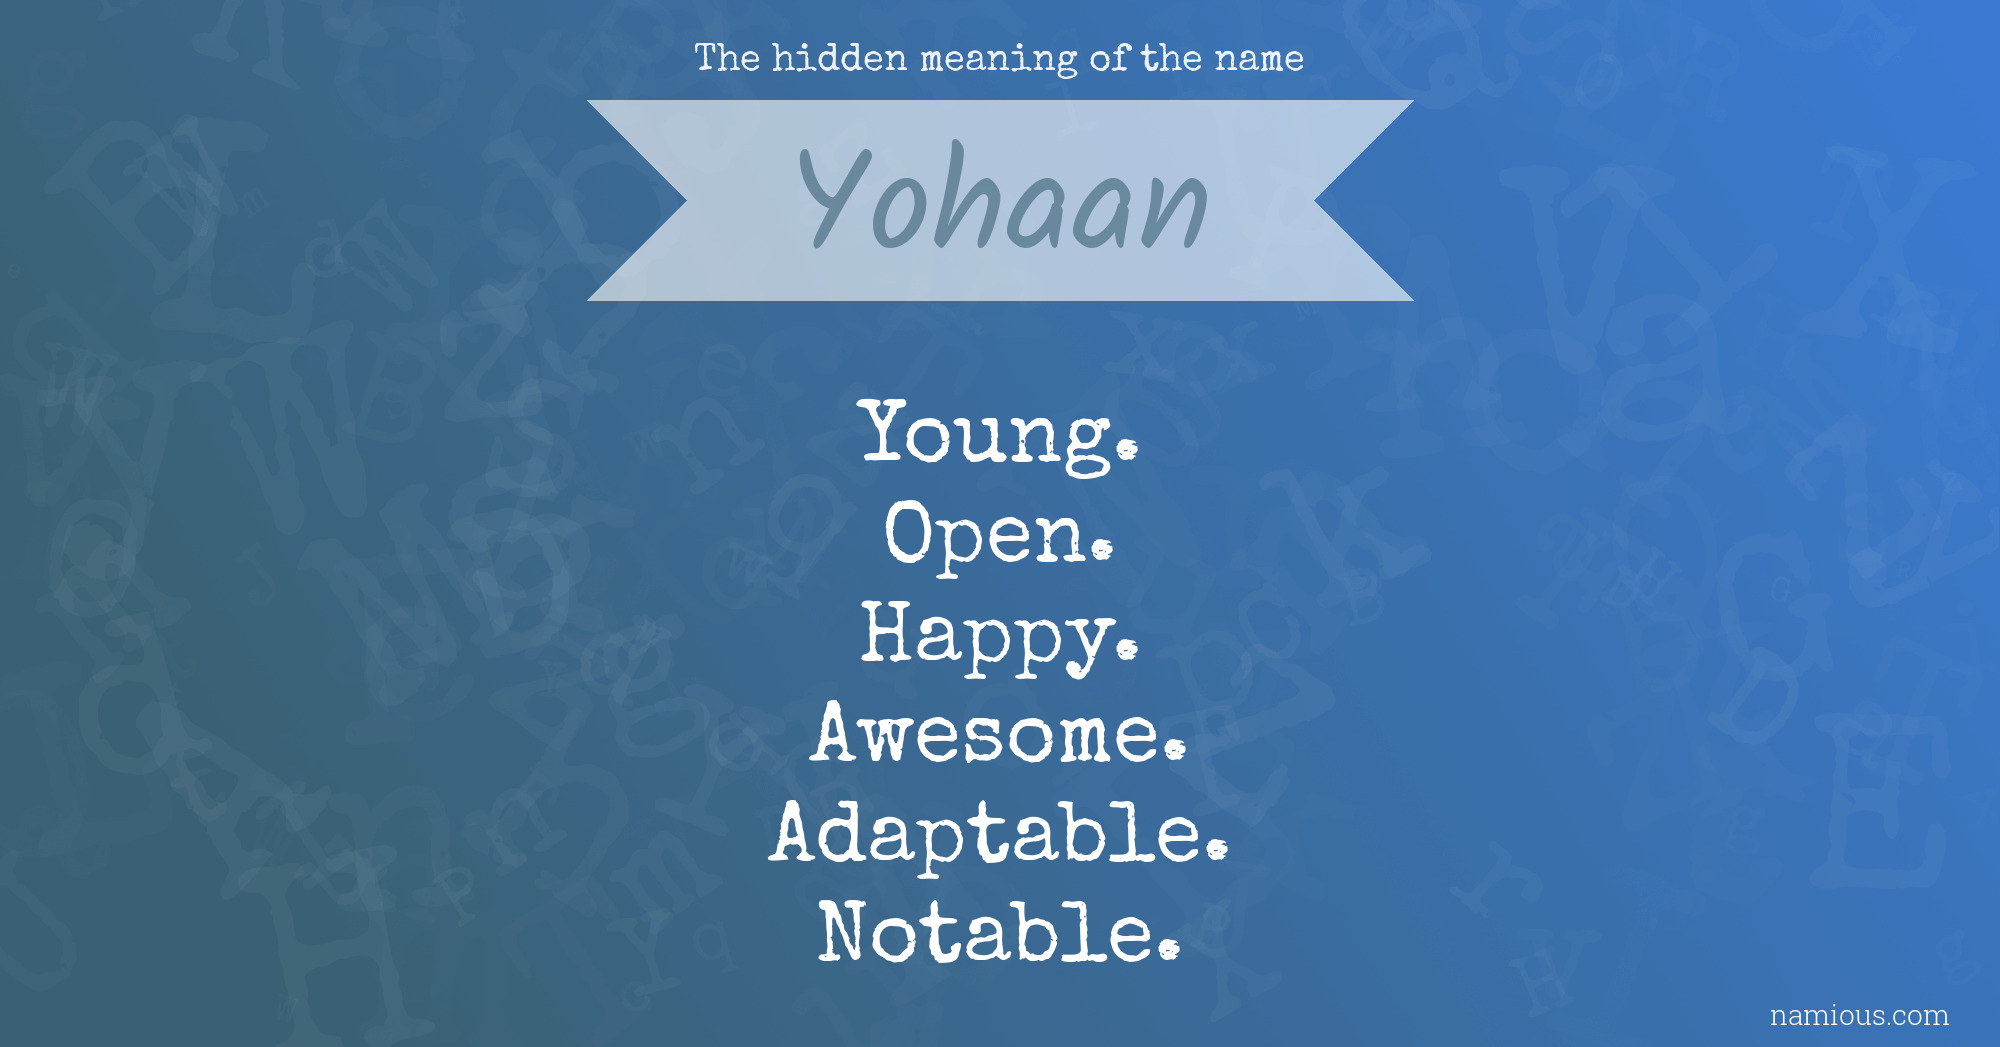 The hidden meaning of the name Yohaan